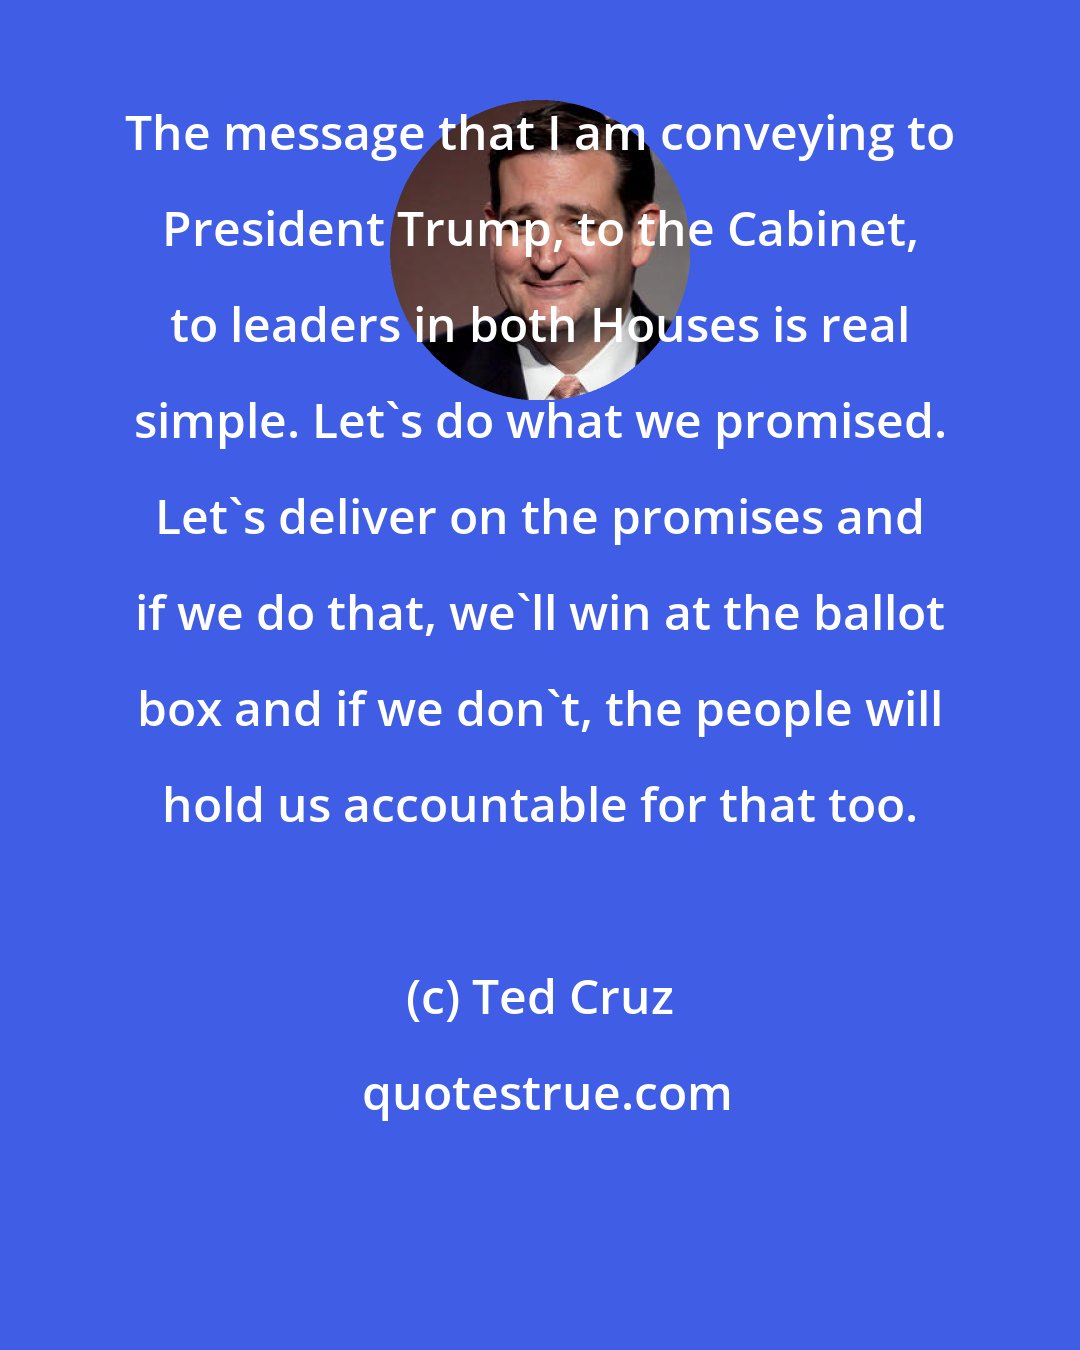 Ted Cruz: The message that I am conveying to President Trump, to the Cabinet, to leaders in both Houses is real simple. Let's do what we promised. Let's deliver on the promises and if we do that, we'll win at the ballot box and if we don't, the people will hold us accountable for that too.